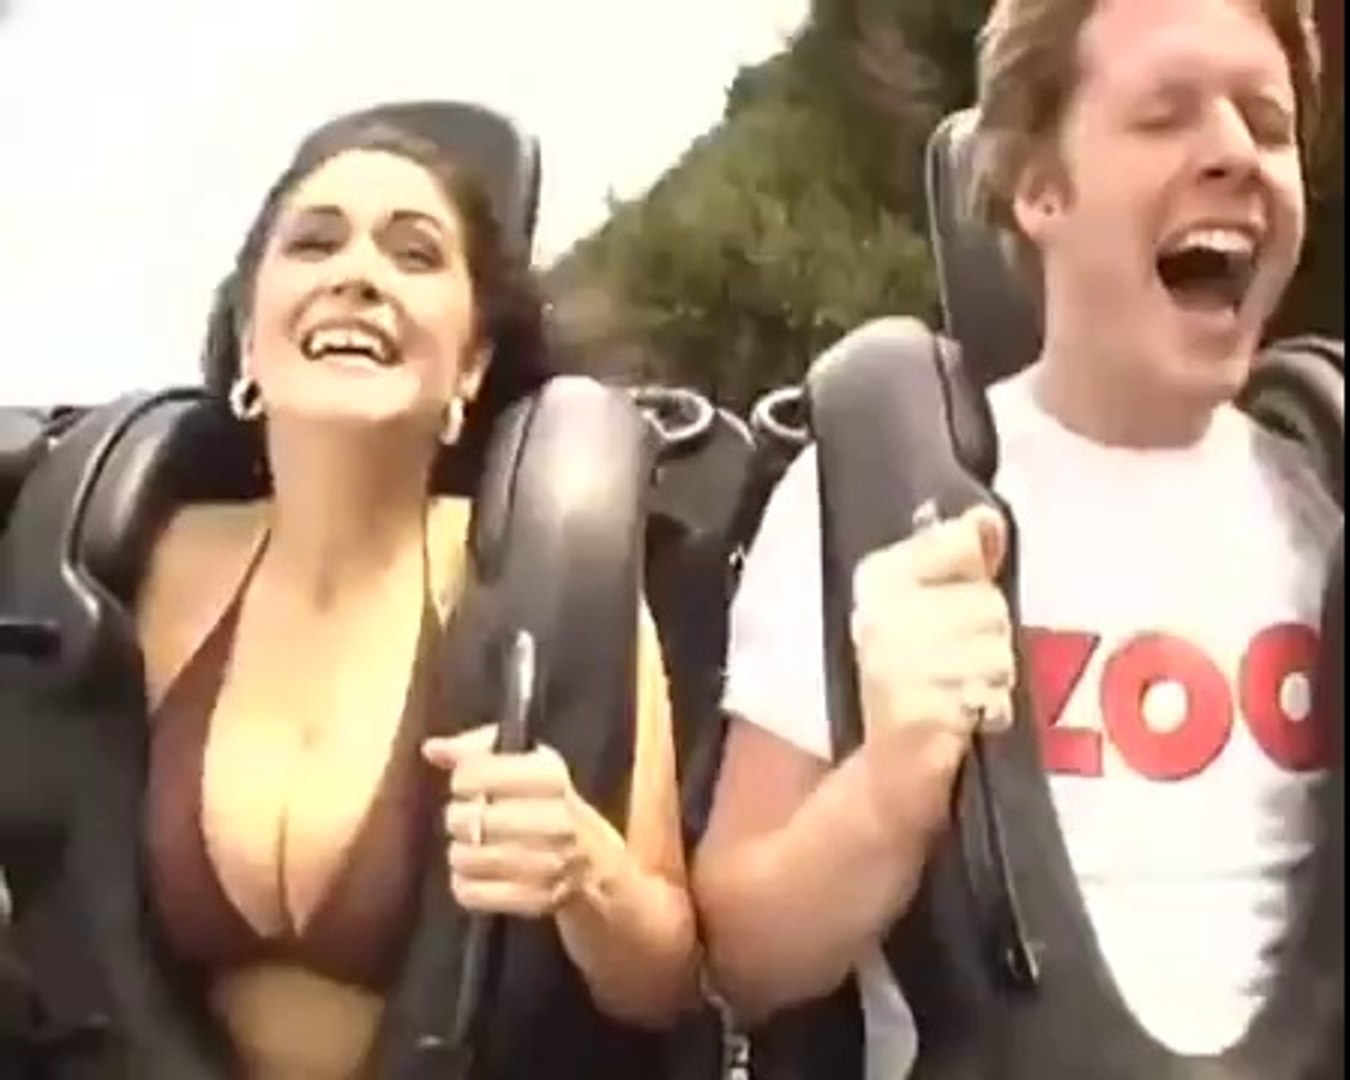 Full-on sling shot fun with bare boob beauties!